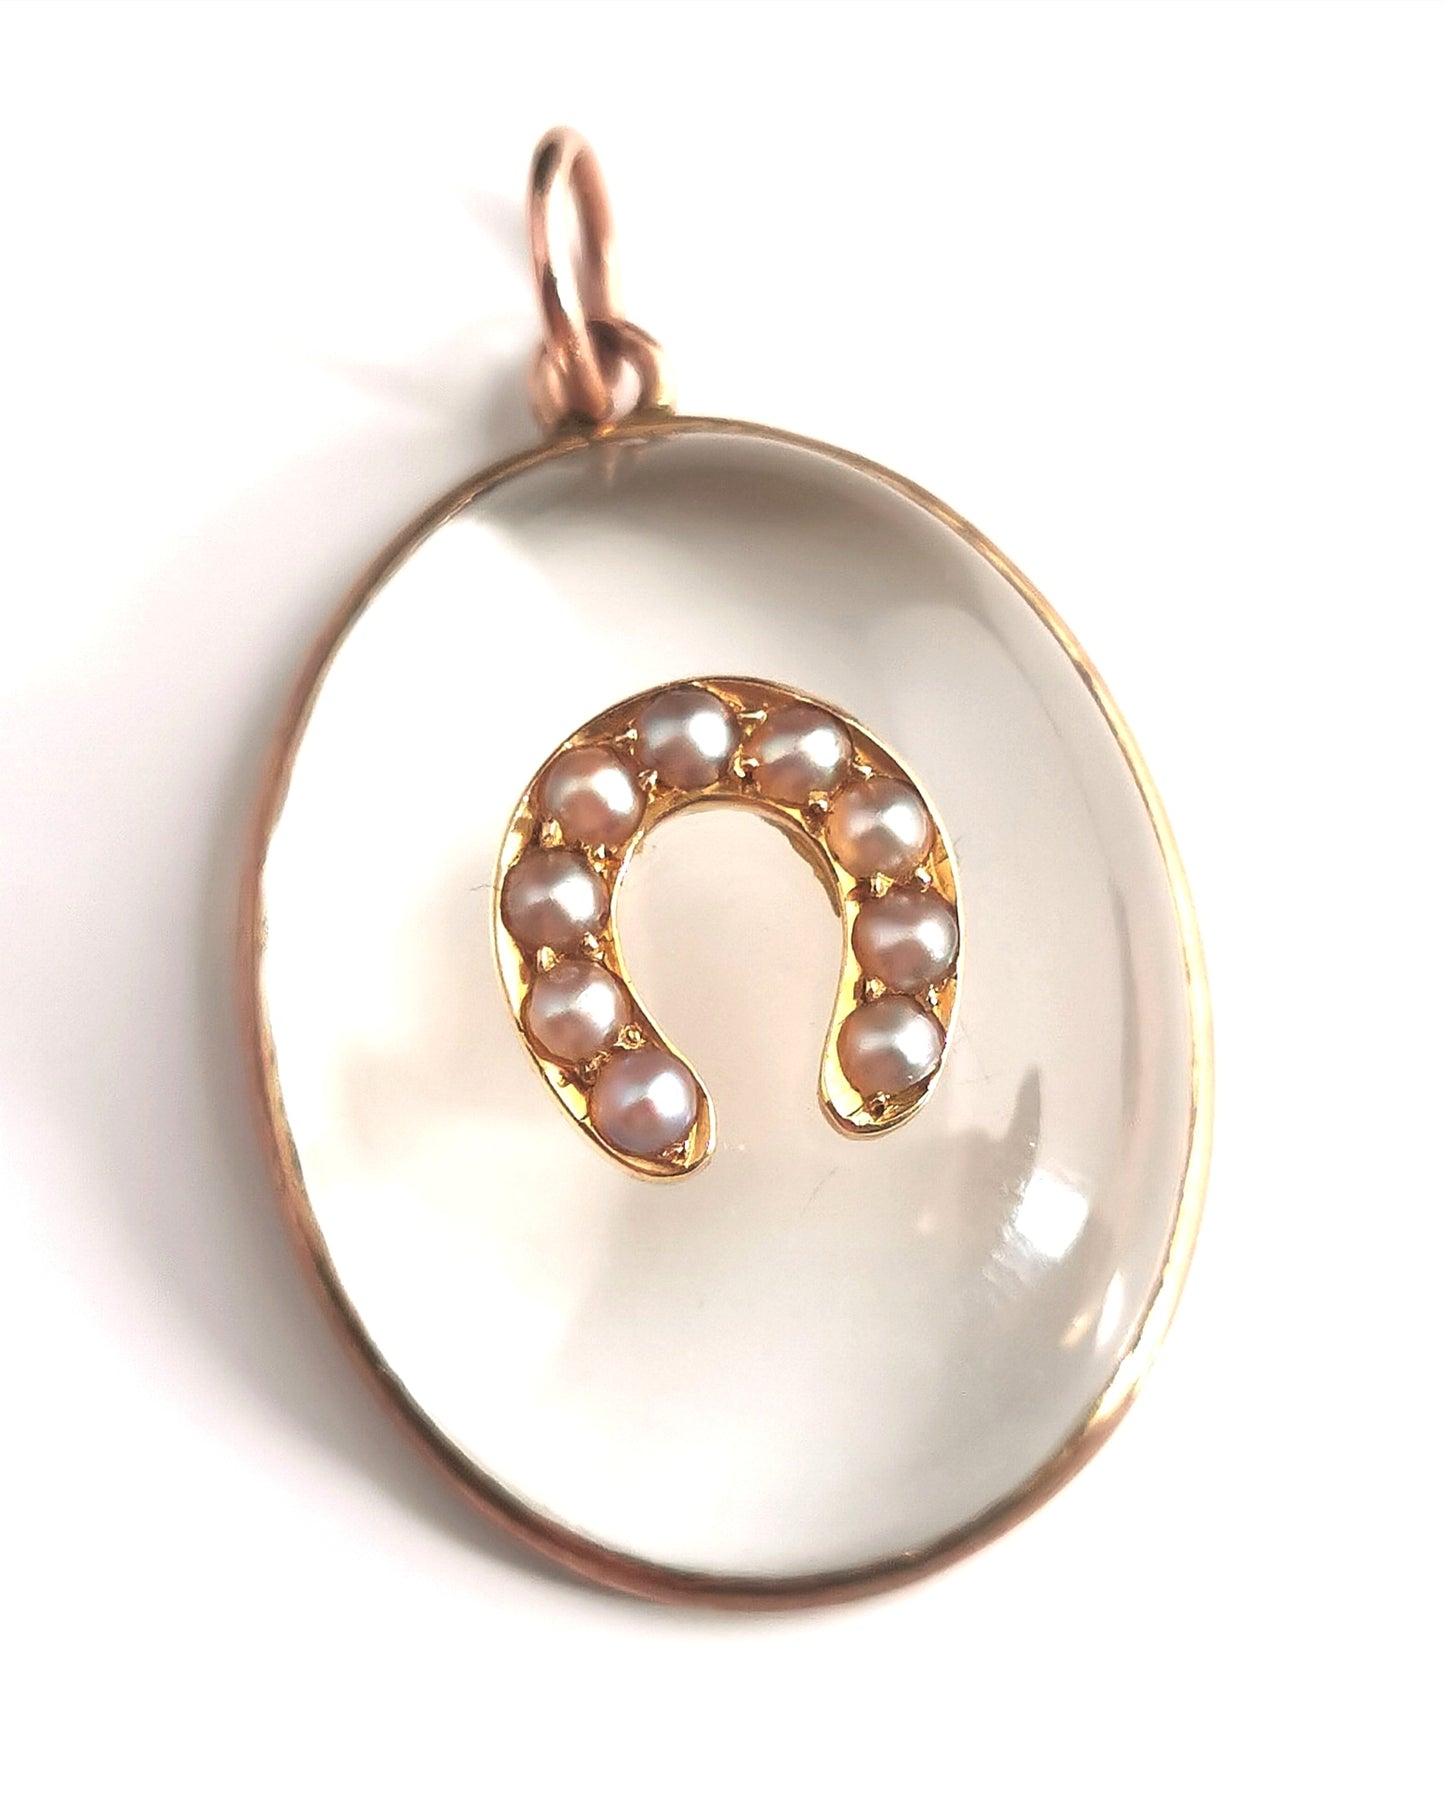 Antique Victorian Rock crystal pendant, horseshoe, split pearl and 9ct gold